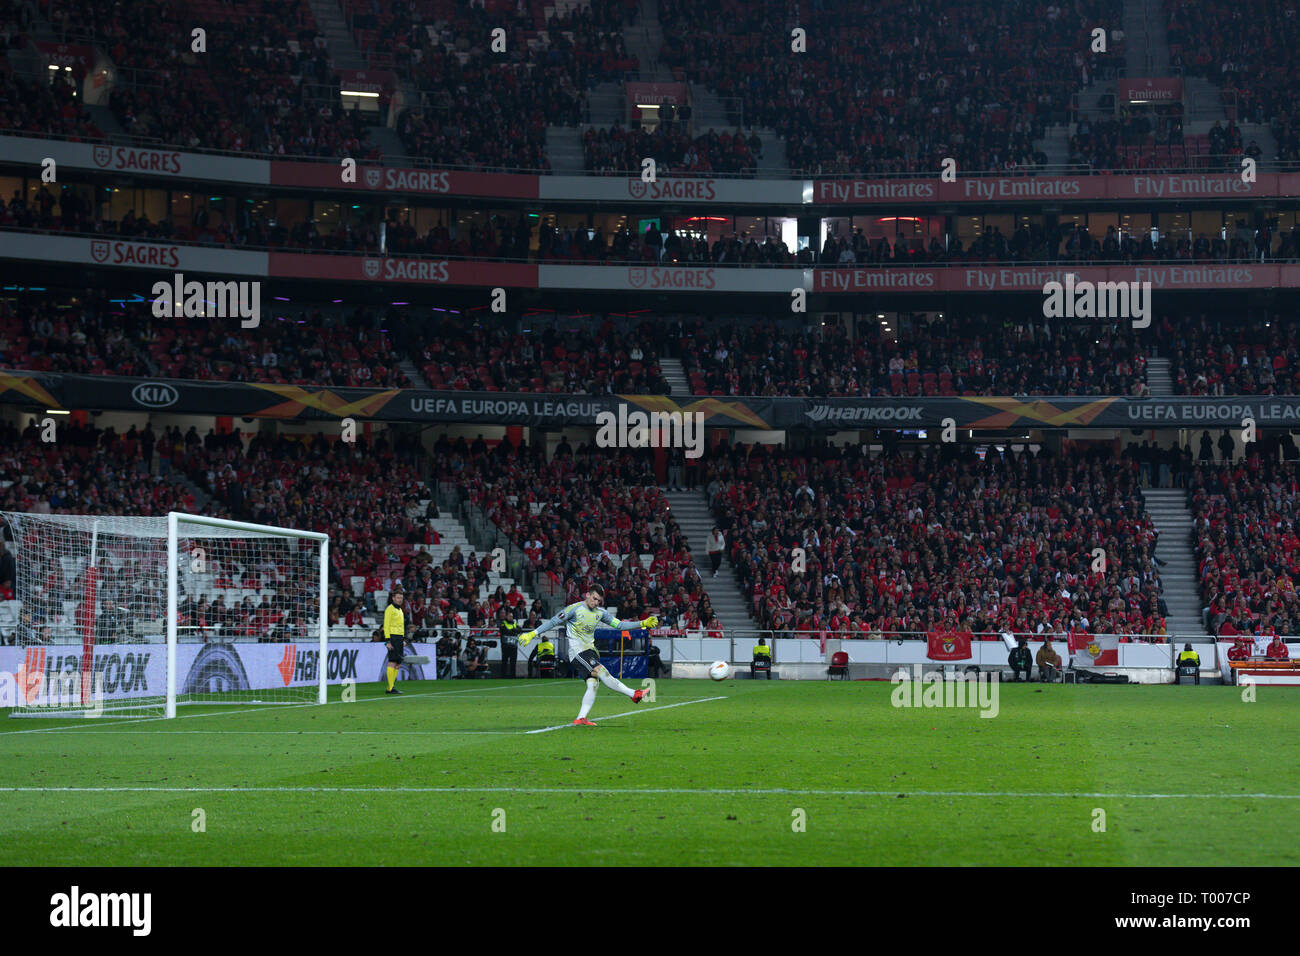 Lisbon, Portugal. March 16th 2019.. Dinamo Zagreb's goalkeeper from Croatia Dominik Livakovic (40) in action during the game of the UEFA Europa League, 1/8 Finals, SL Benfica vs Dinamo Zagreb © Alexandre de Sousa/Alamy Live News Stock Photo